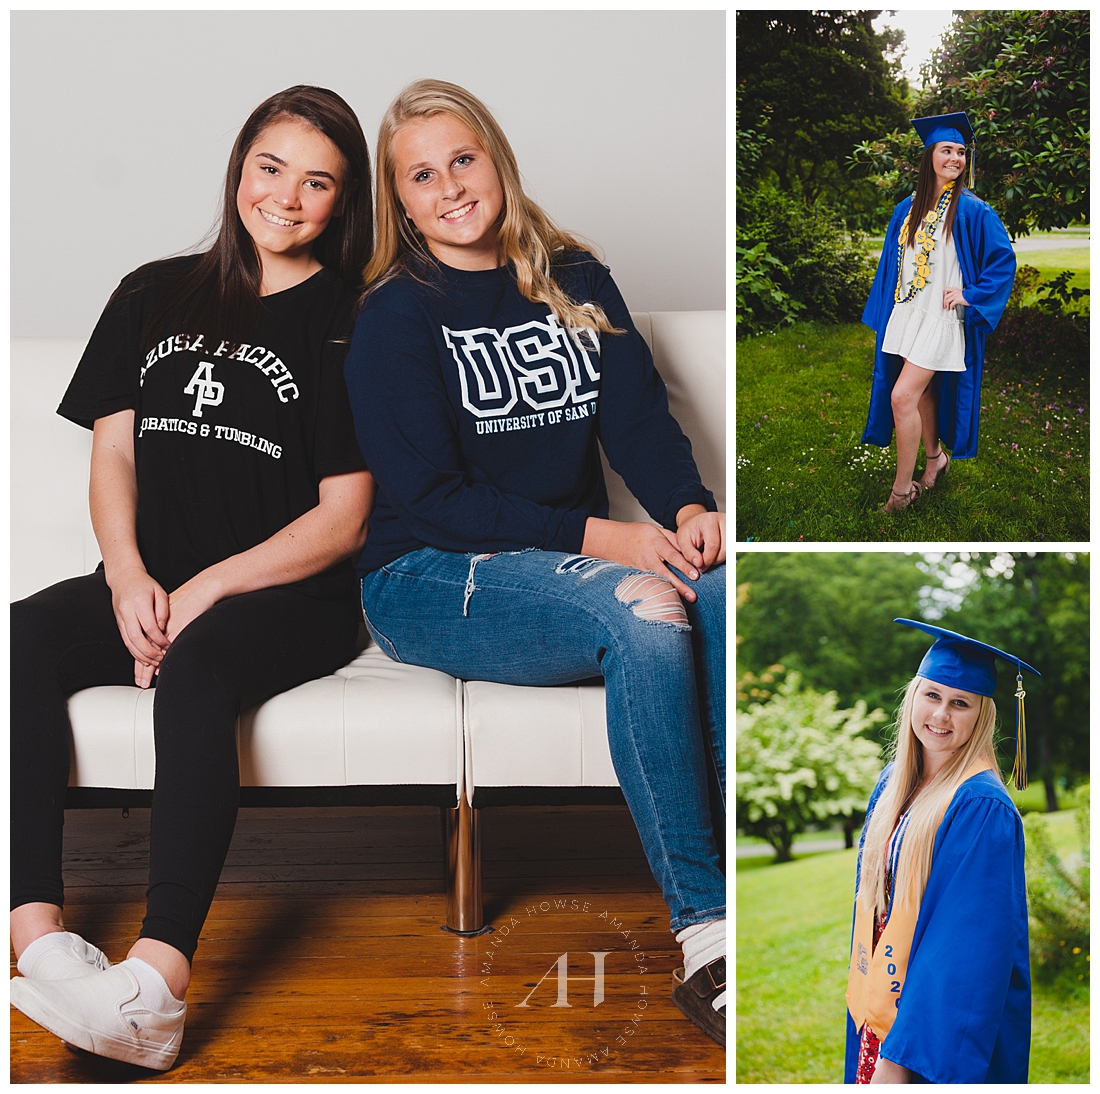 Tacoma Senior Portraits with Friends for the Class of 2020 Graduation | Photographed by Tacoma Senior Photographer Amanda Howse